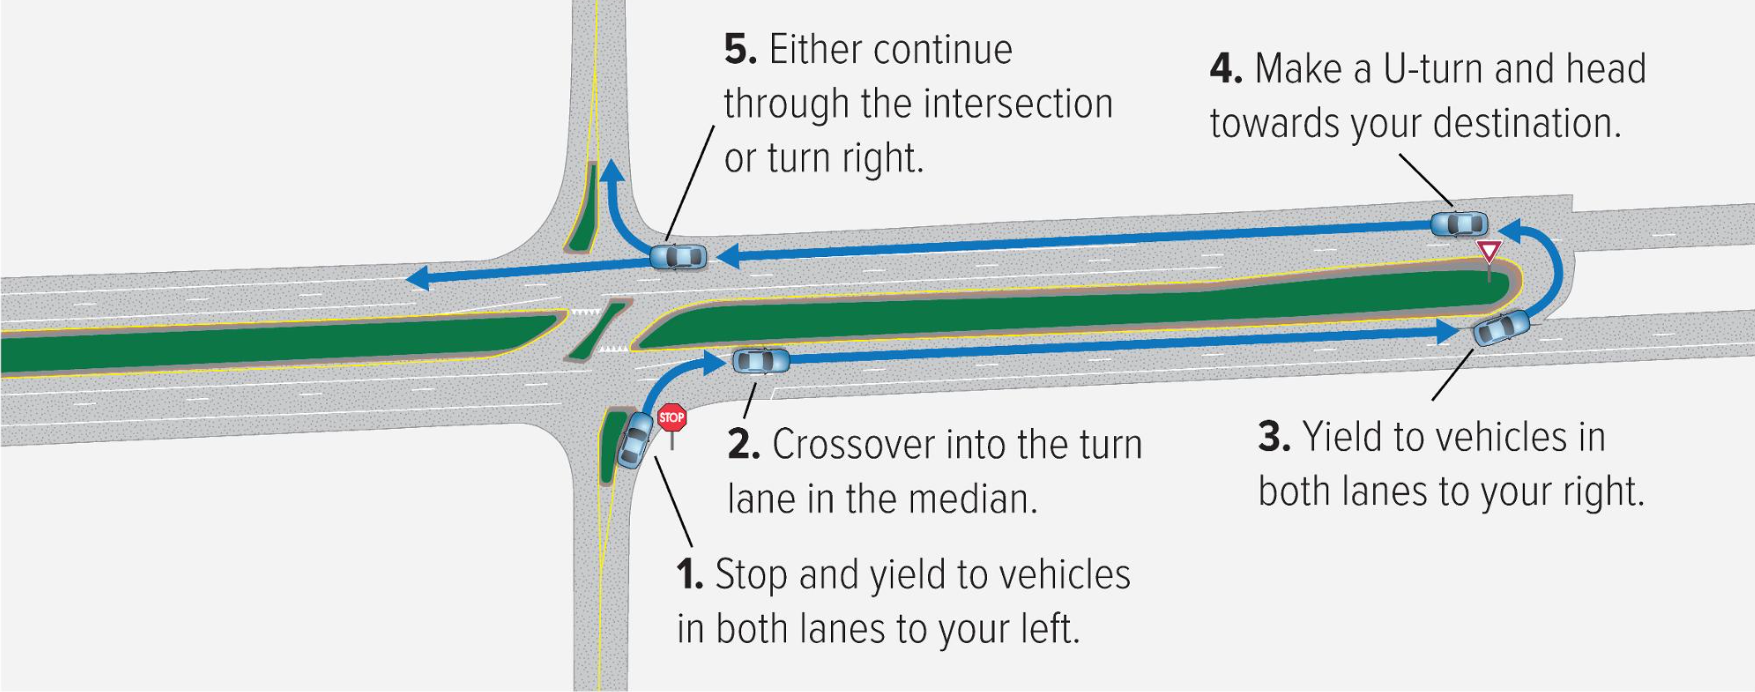 1 Stop and yield to vehicles in both lanes to your left 2 Crossover into the lane in the median 3 Yield to vehicles in both lanes to your right 4 Make a U-turn and head towards your destination 5 Either continue through the intersection or turn right